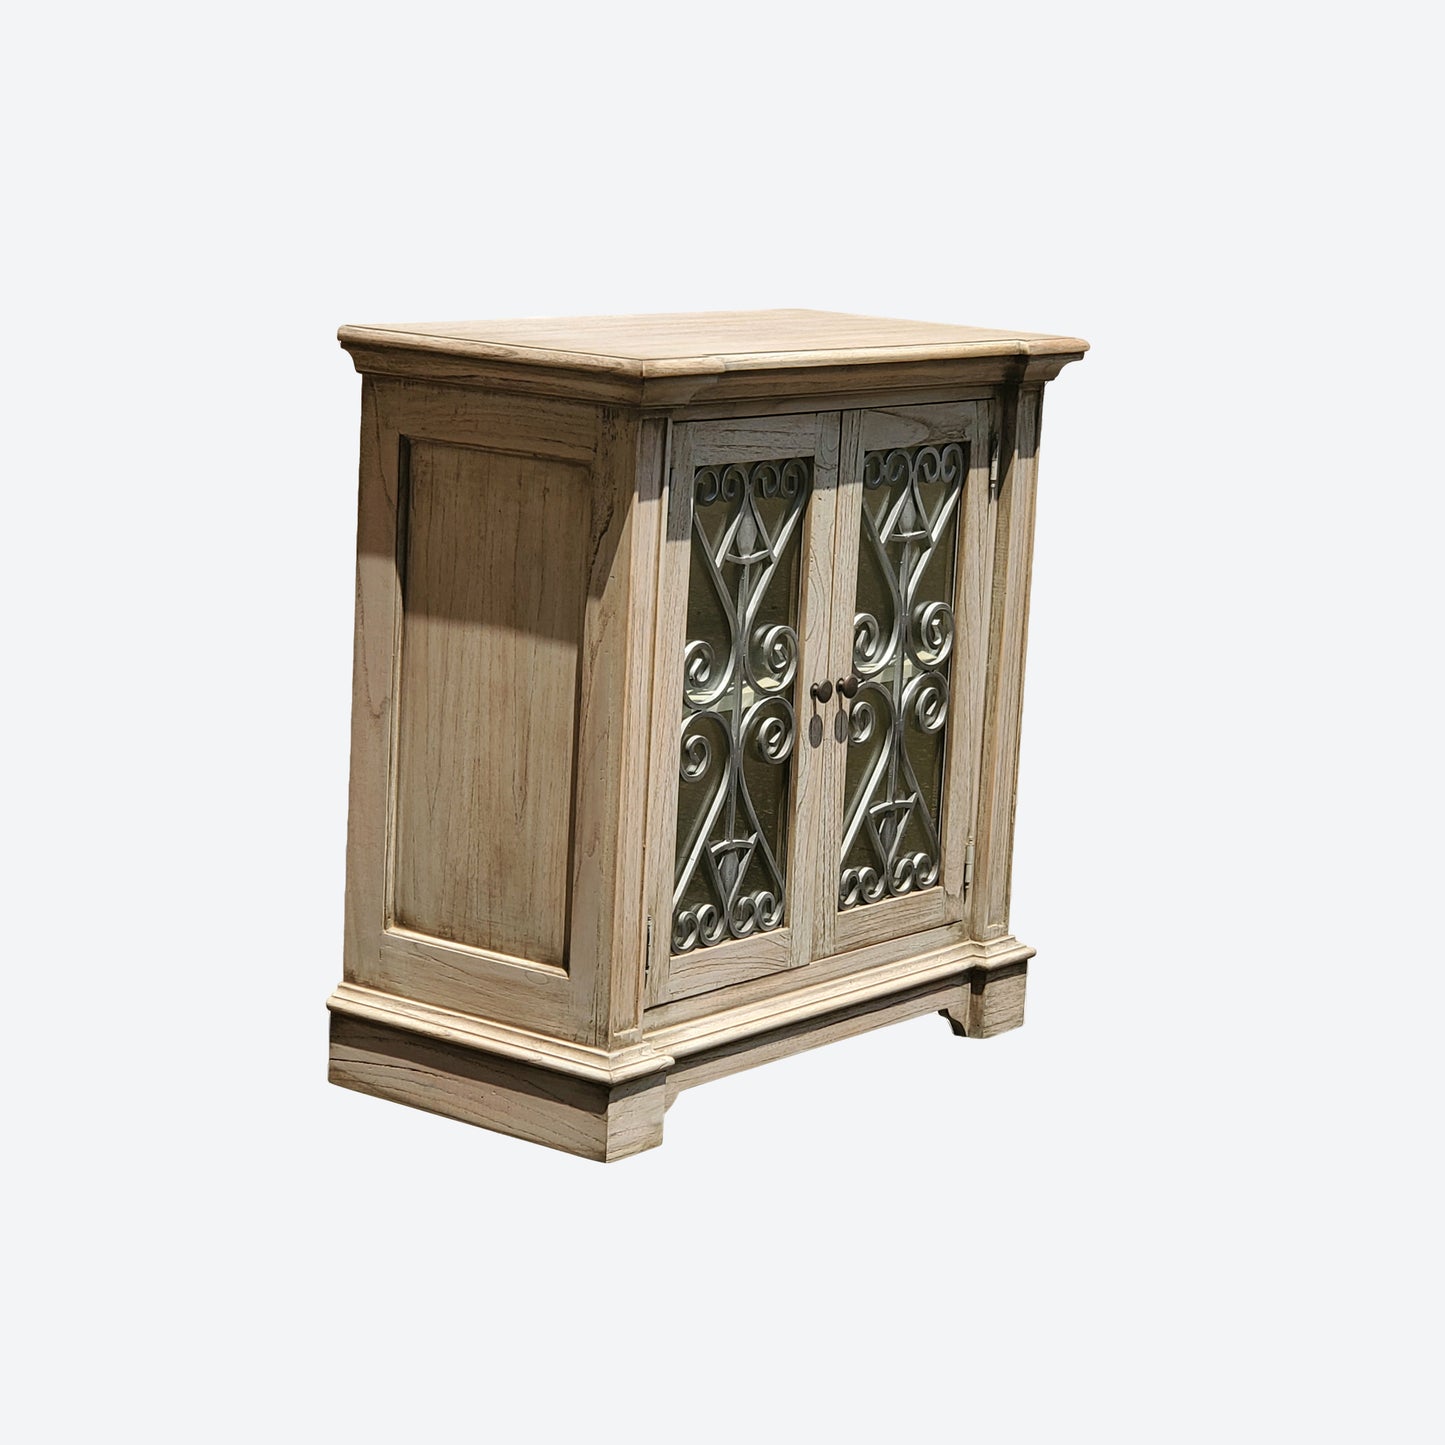 Light GRAY CONSOLE TABLE /WINE CABINET WITH SILVER ENGRAVING -SK- SKU 1058